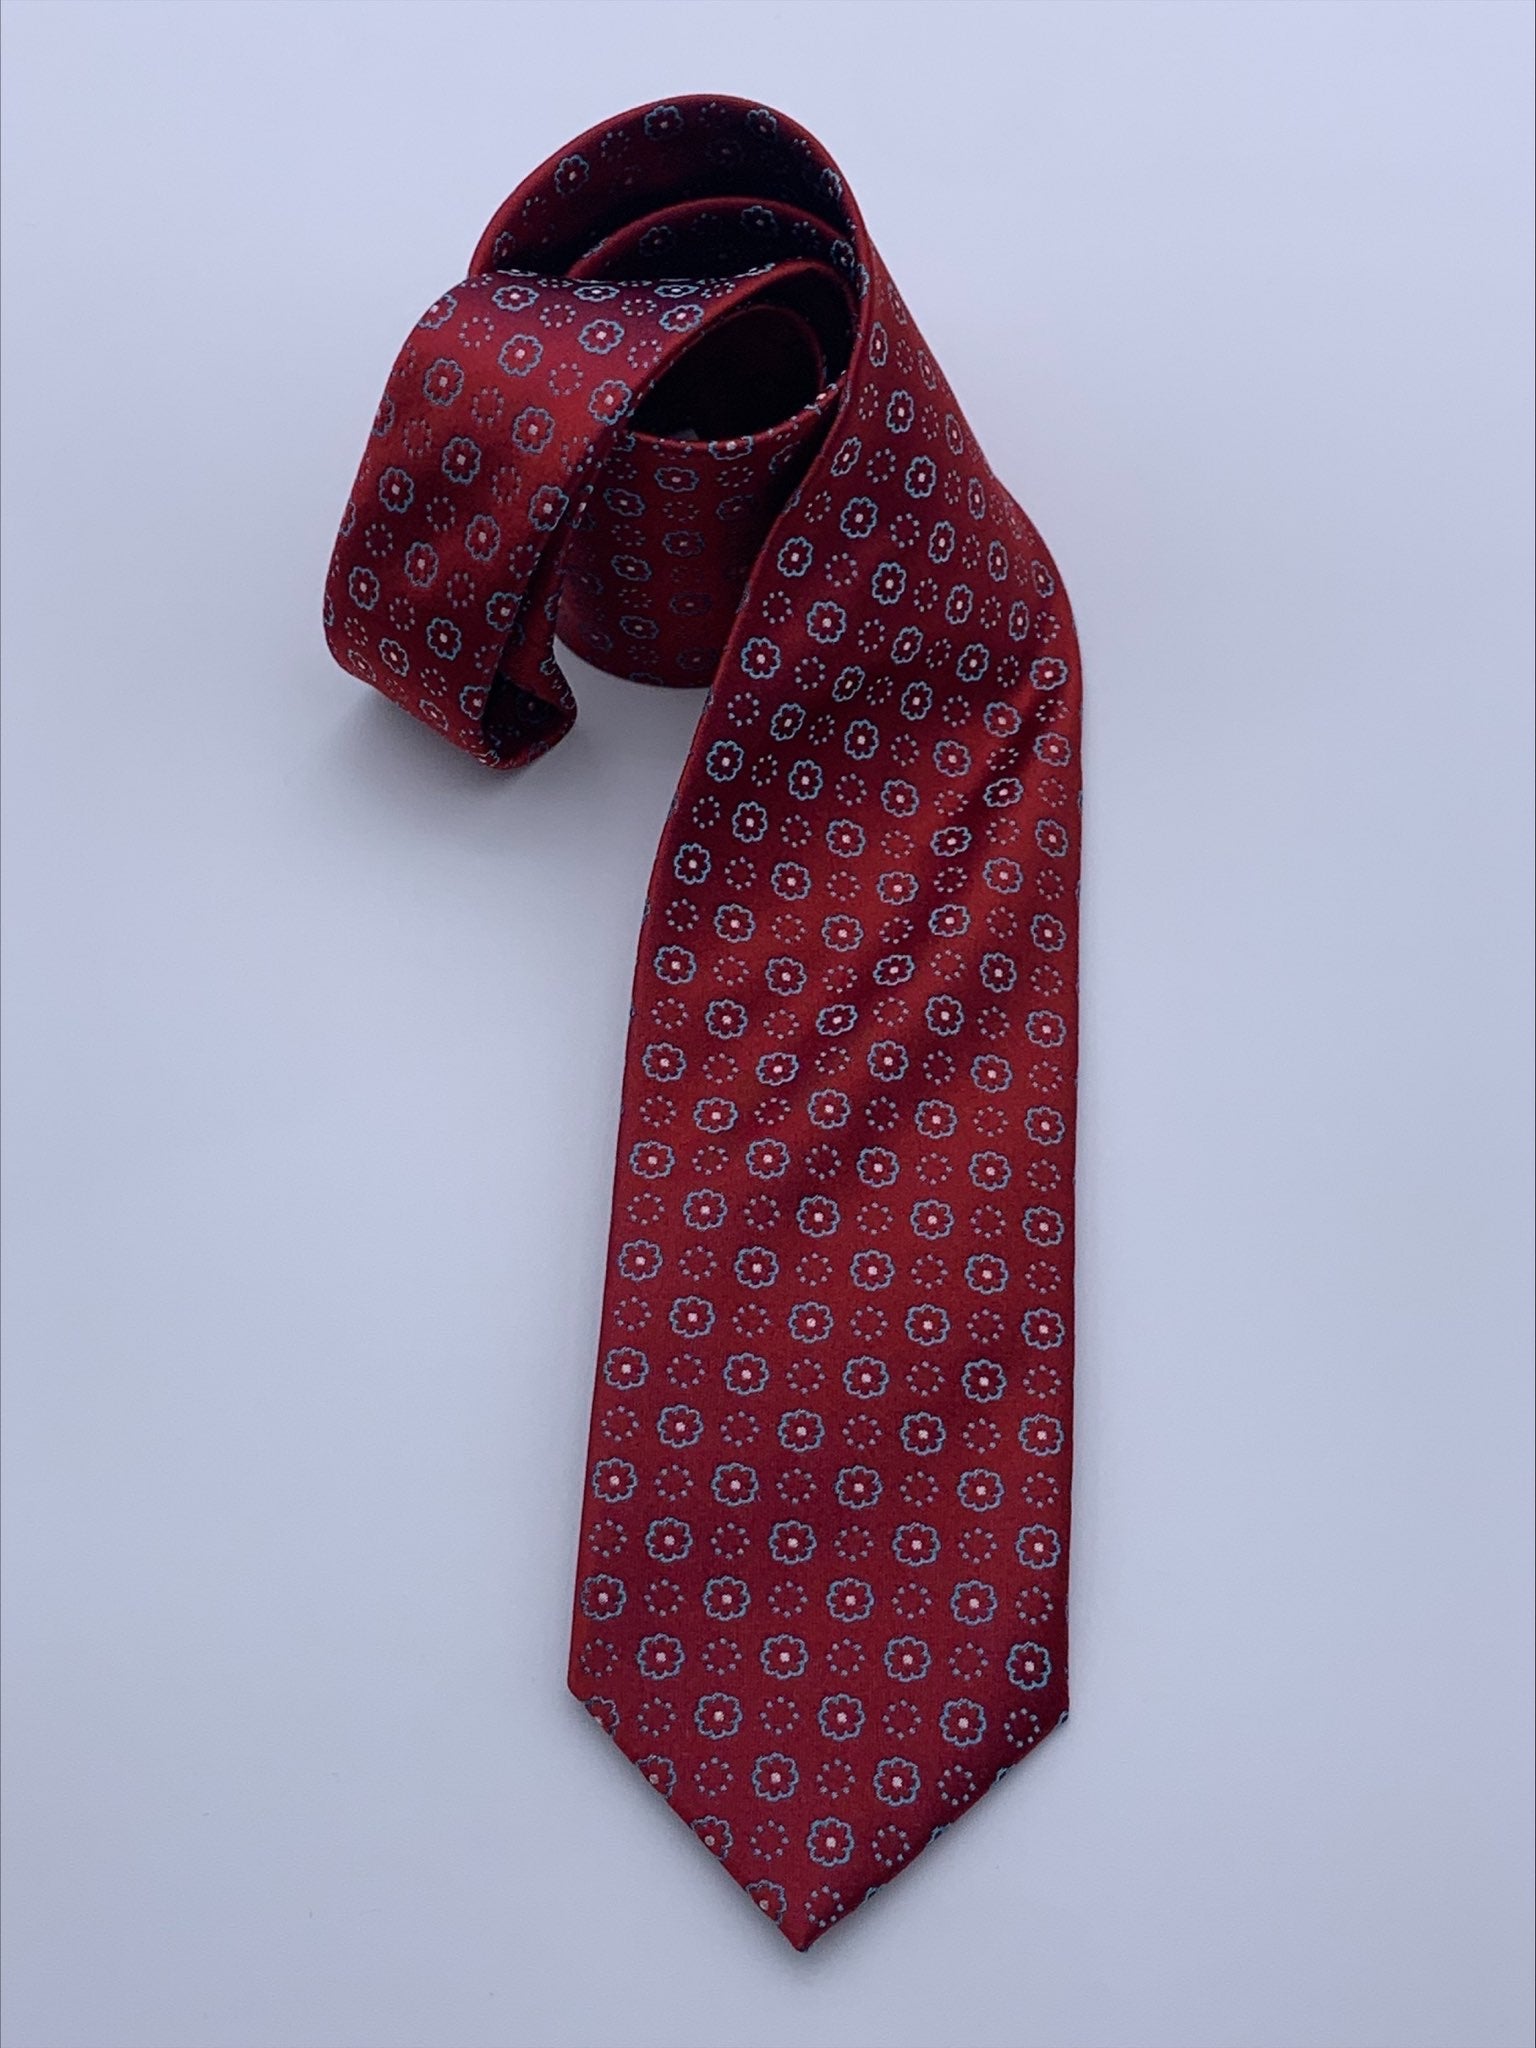 Pure silk three fold tie.Handmade by our Italian tailors.100% Pure silk.Our ties standard width is 8 cm (3.15 inch), standard length is 150 cm (59 inch) |Sartoria Dei Duchi-Atri